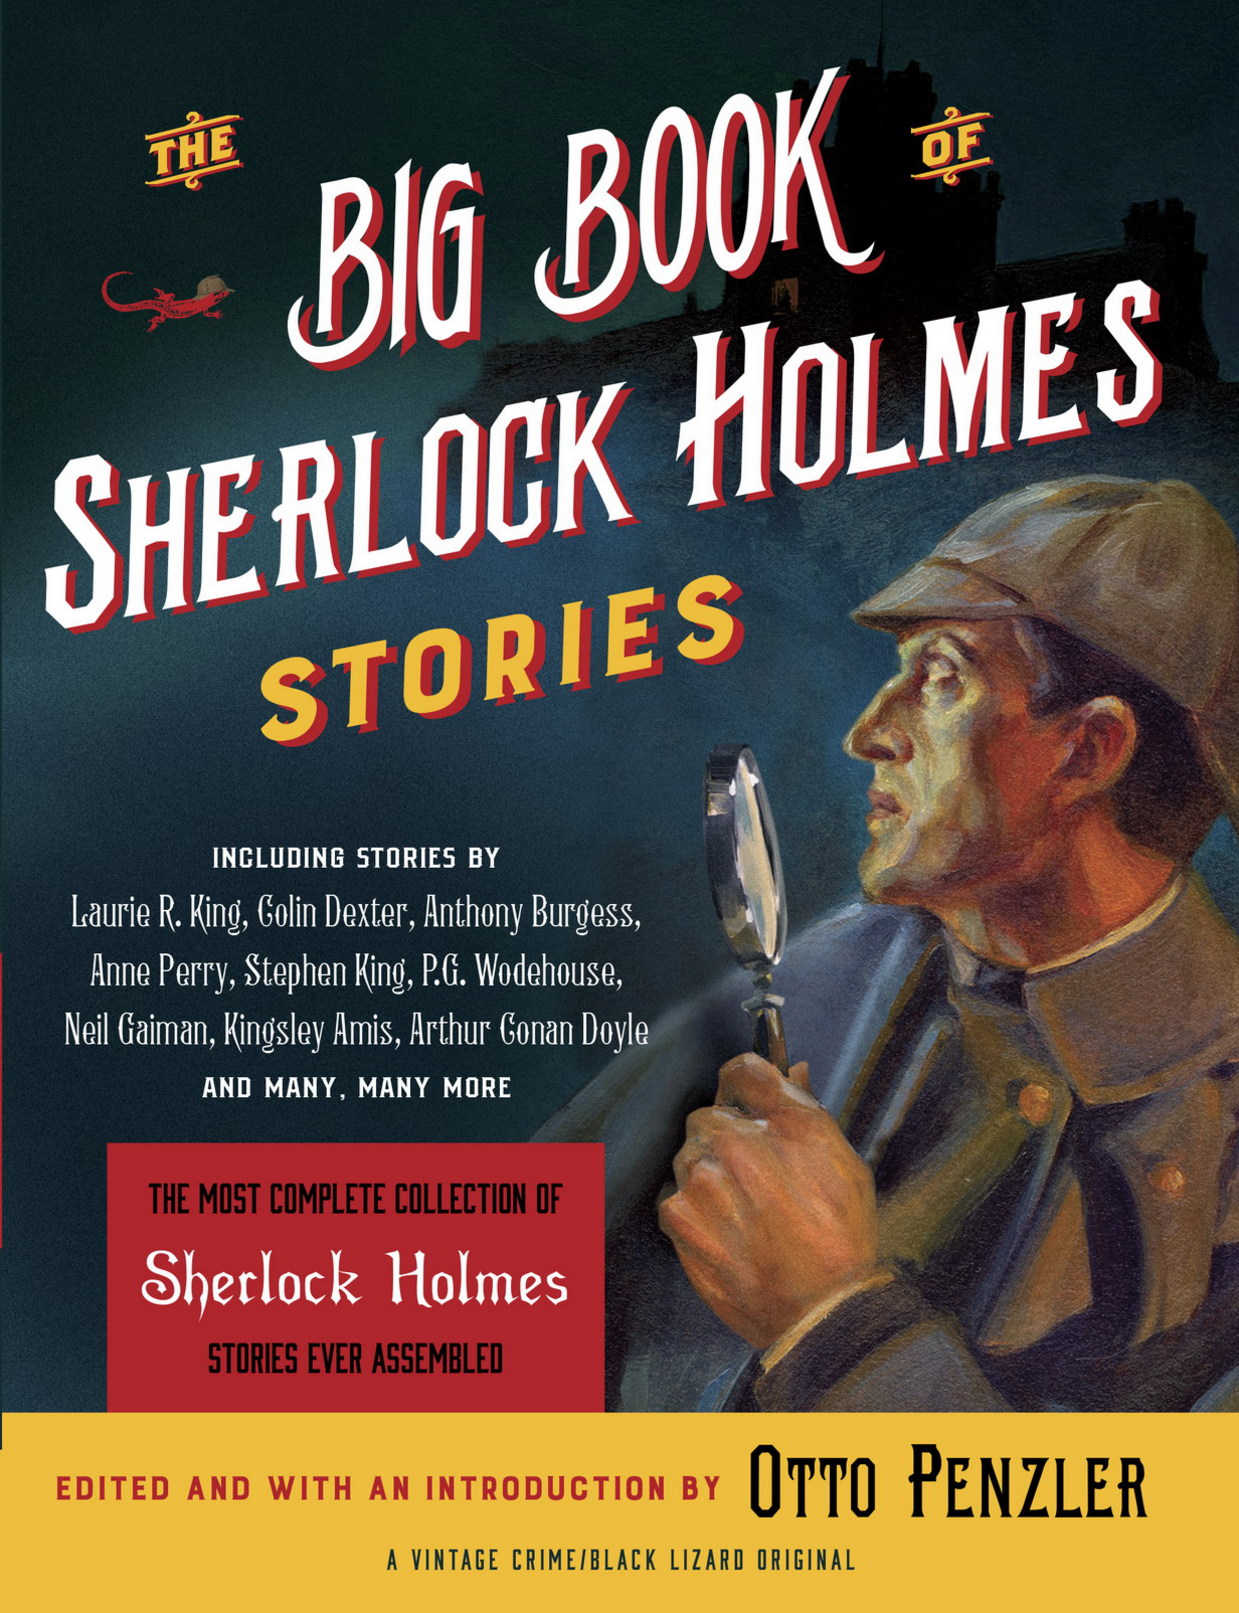 The Big Book of Sherlock Holmes Stories (2015) by Otto Penzler